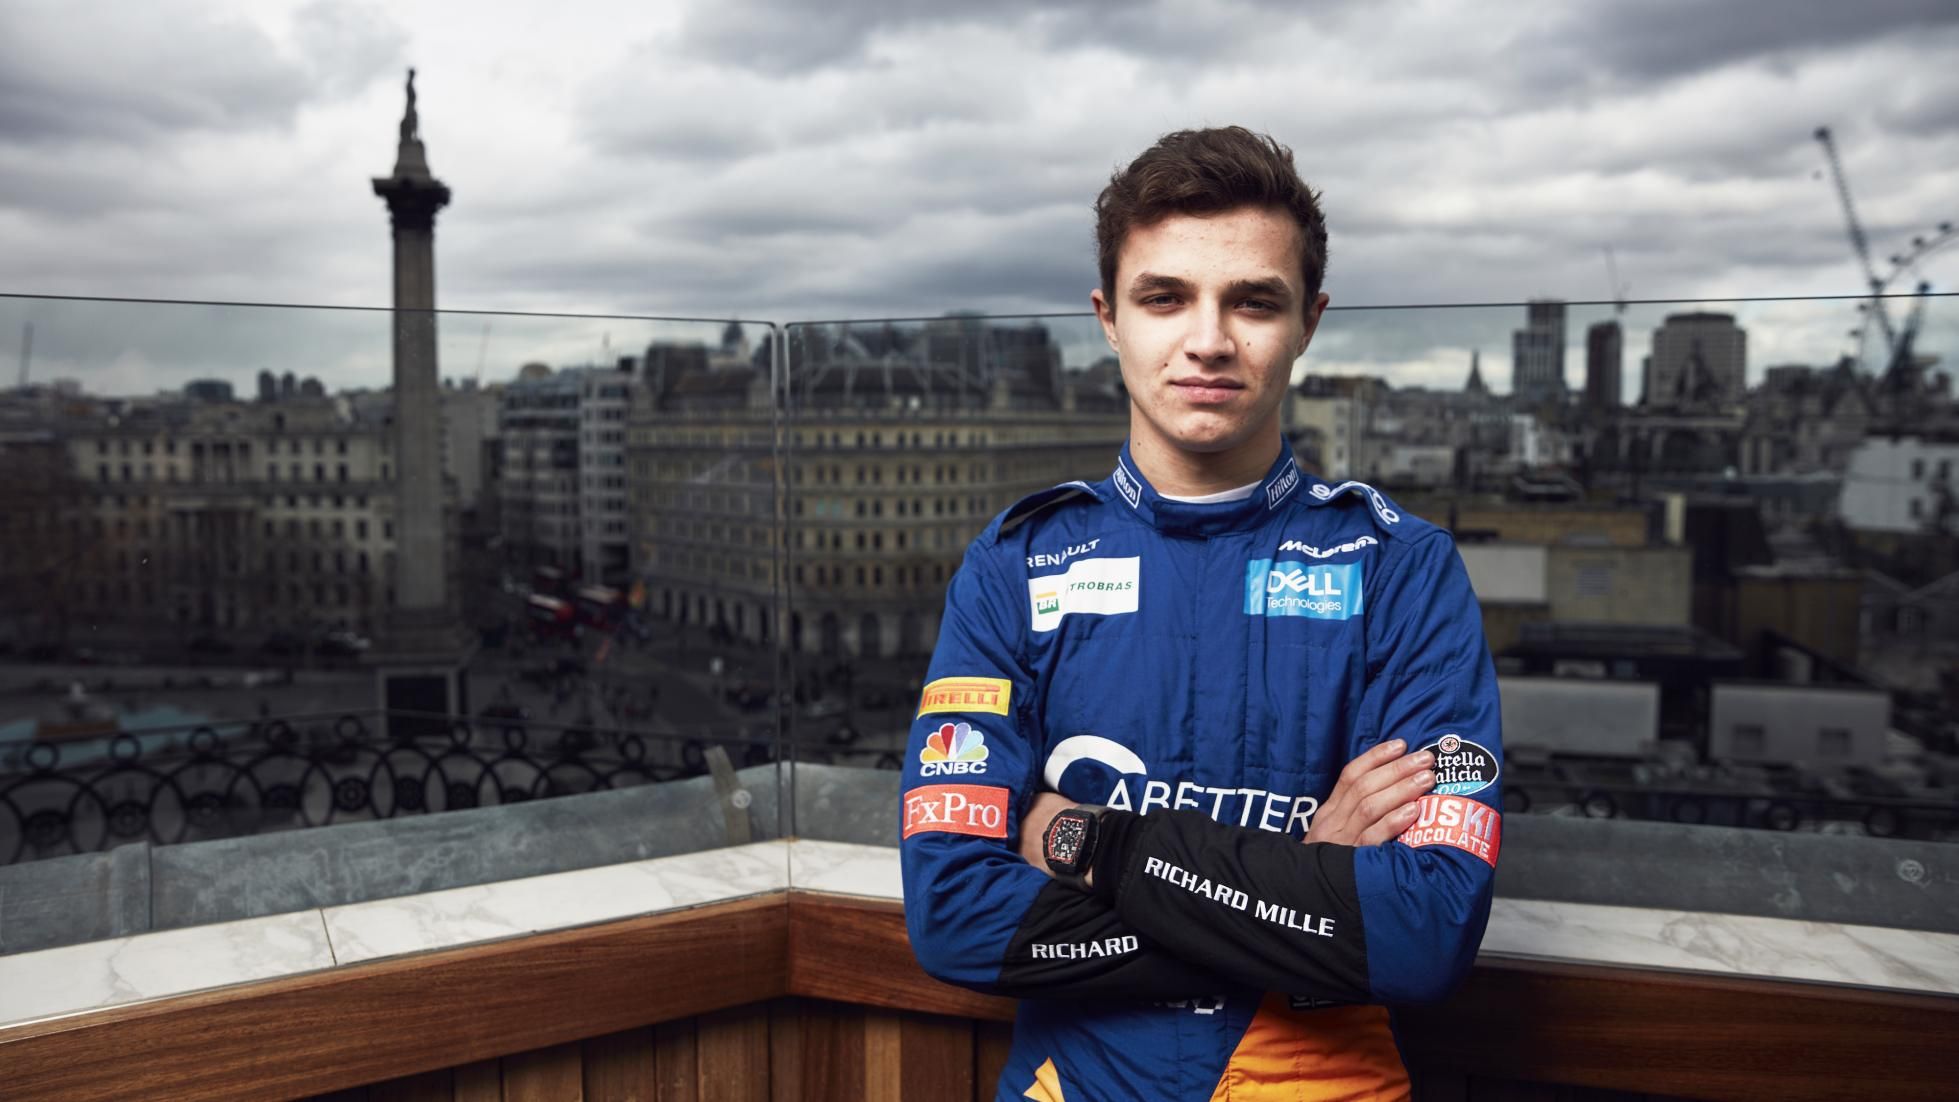 F1 racer Lando Norris poses for interview on a rooftop